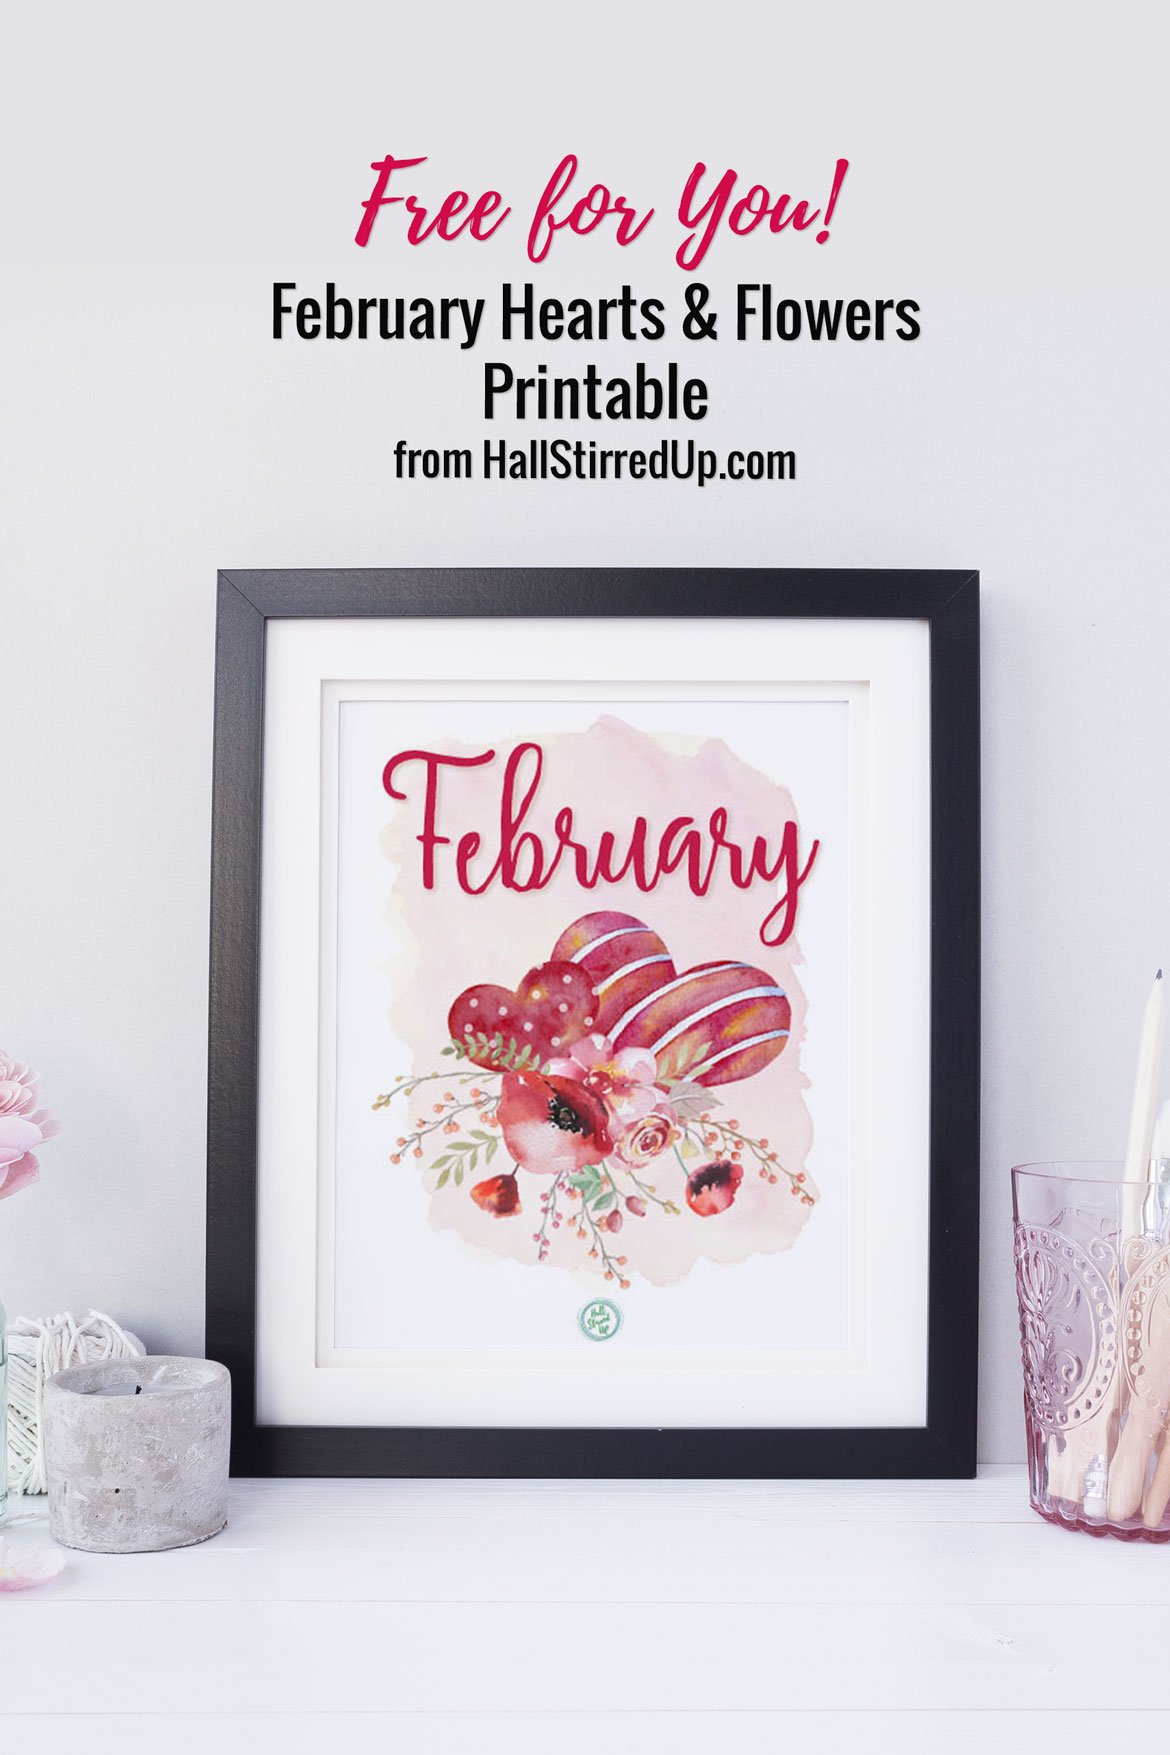 Free for you February Hearts and Flowers printable